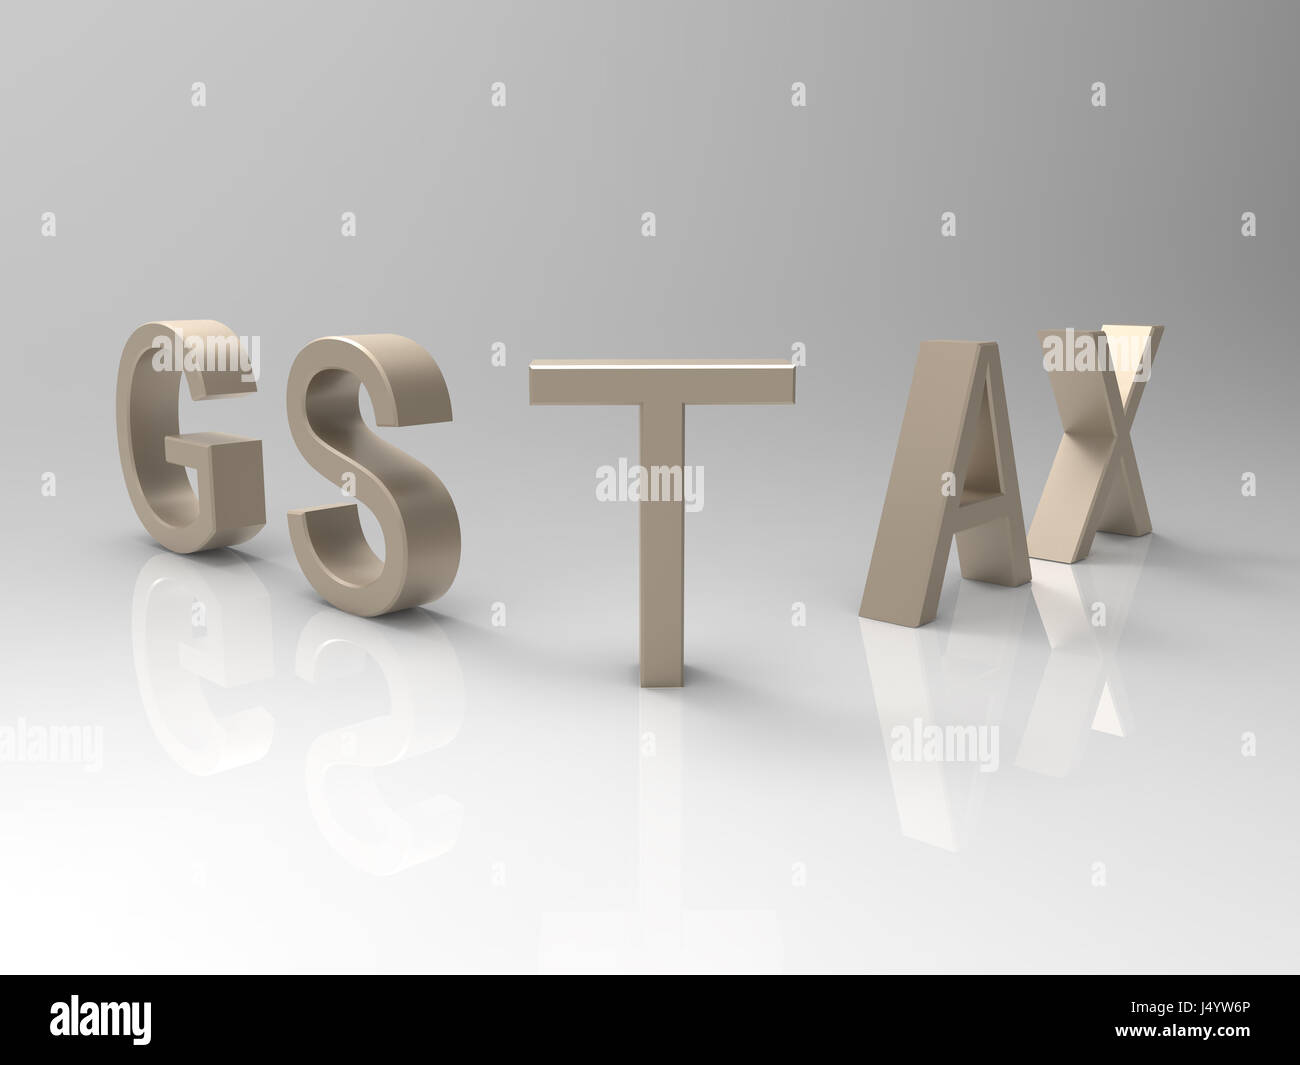 GST tax India Indian VAT taxation concept Stock Photo